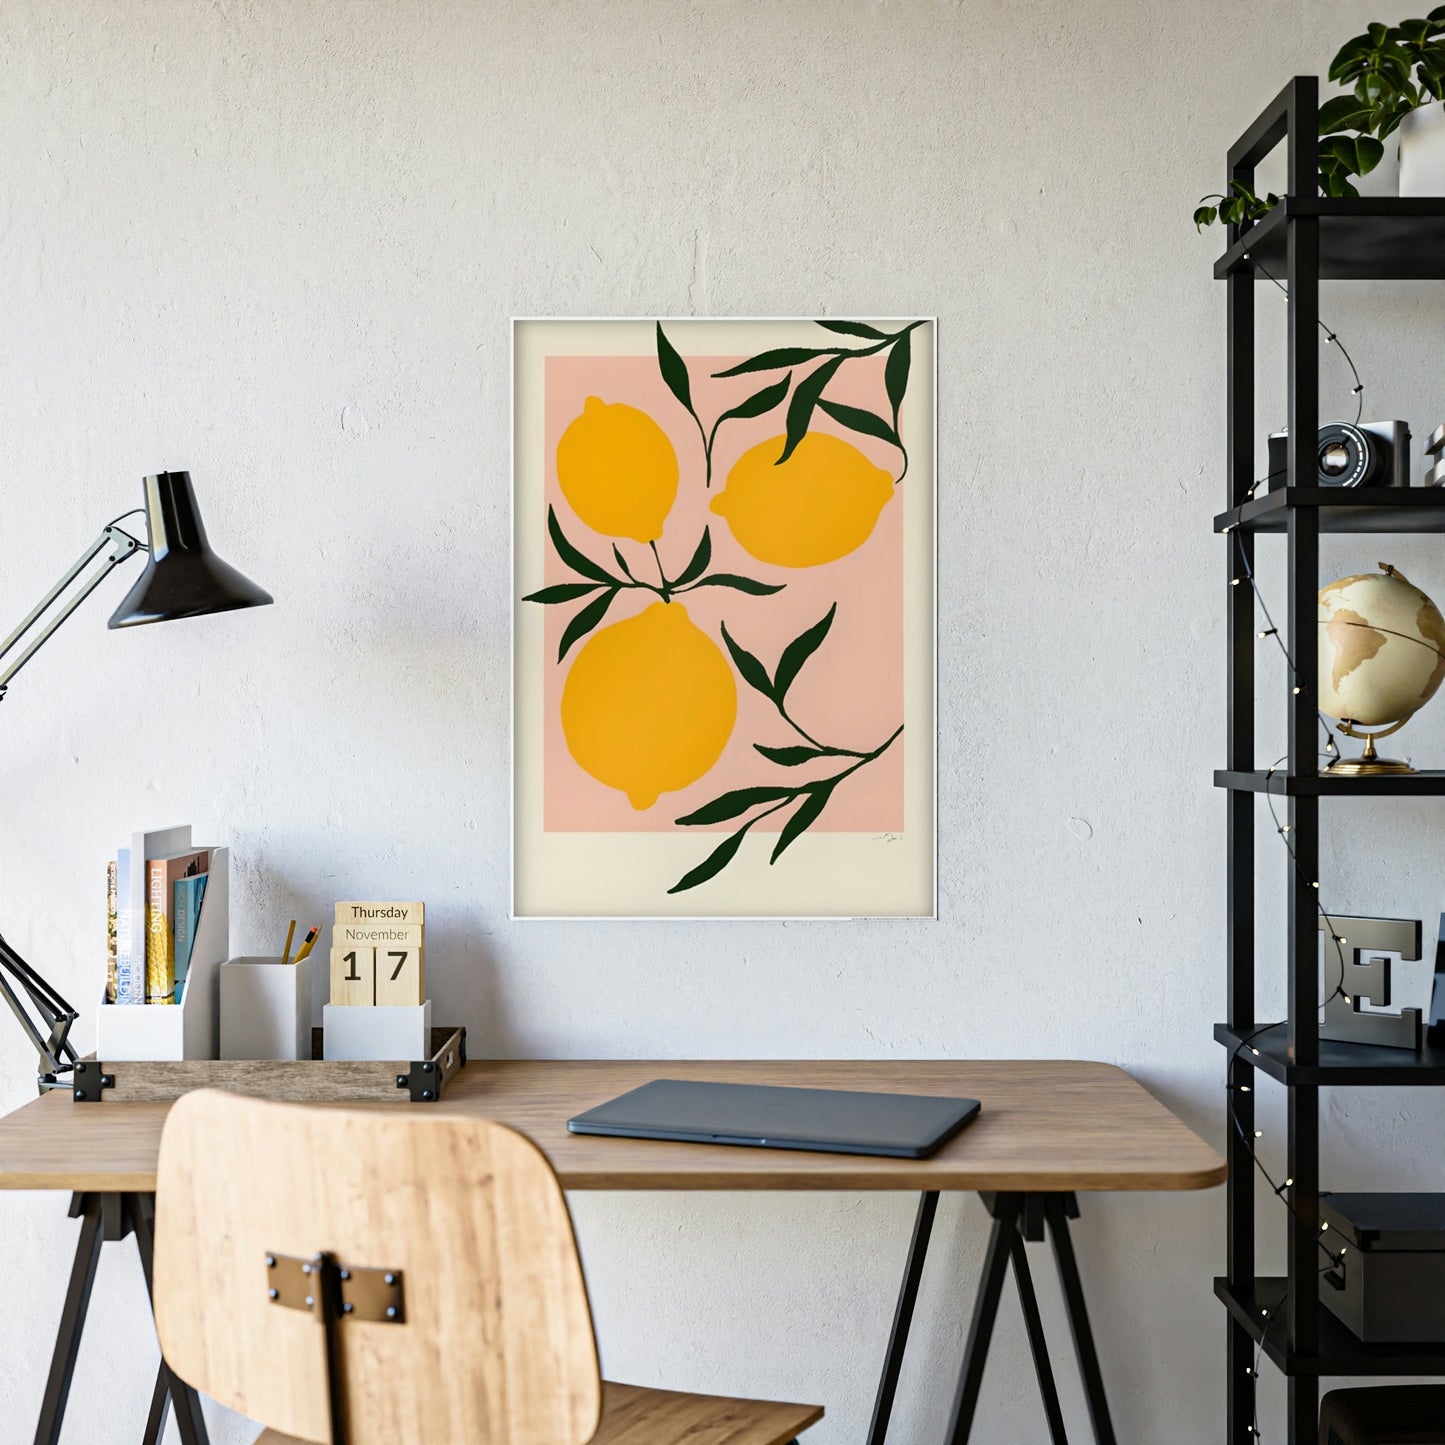 Refreshing and Vibrant Framed Poster and Canvas Print of Yellow Lemons